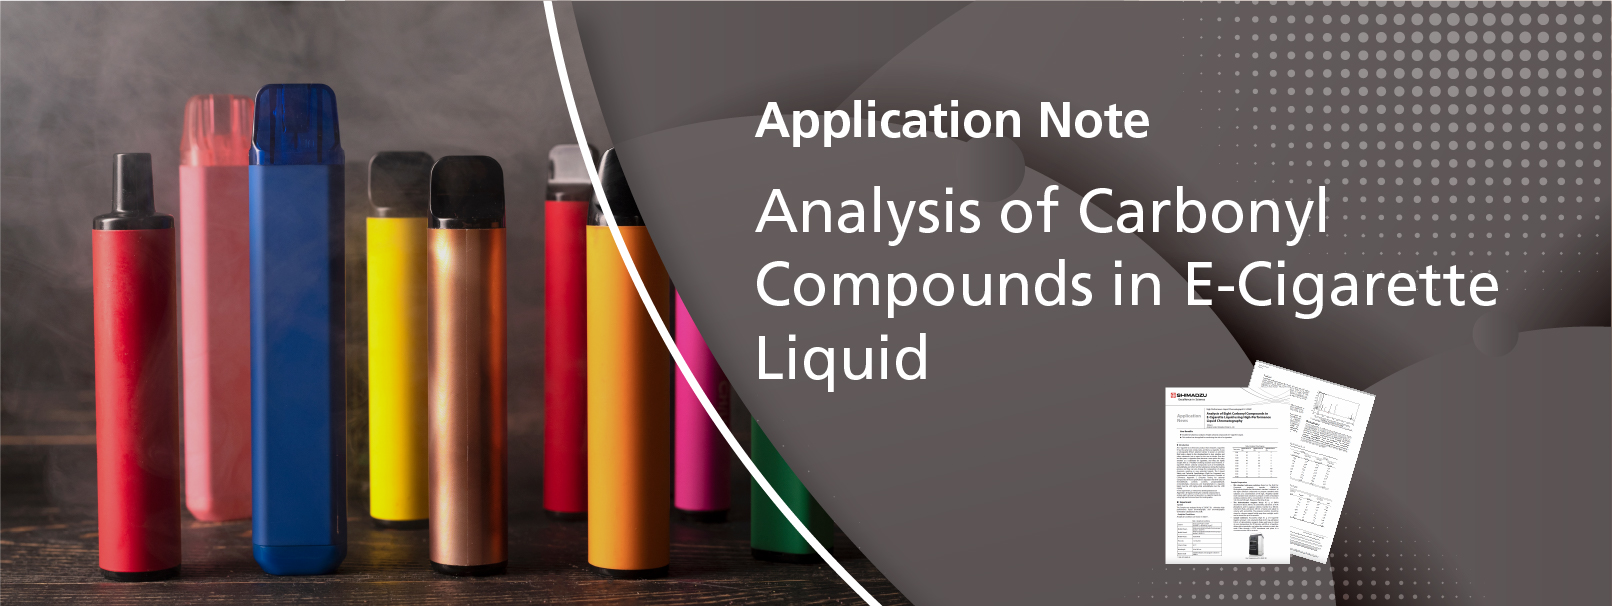 Analysis of Carbonyl Compounds in E-Cigarette Liquid